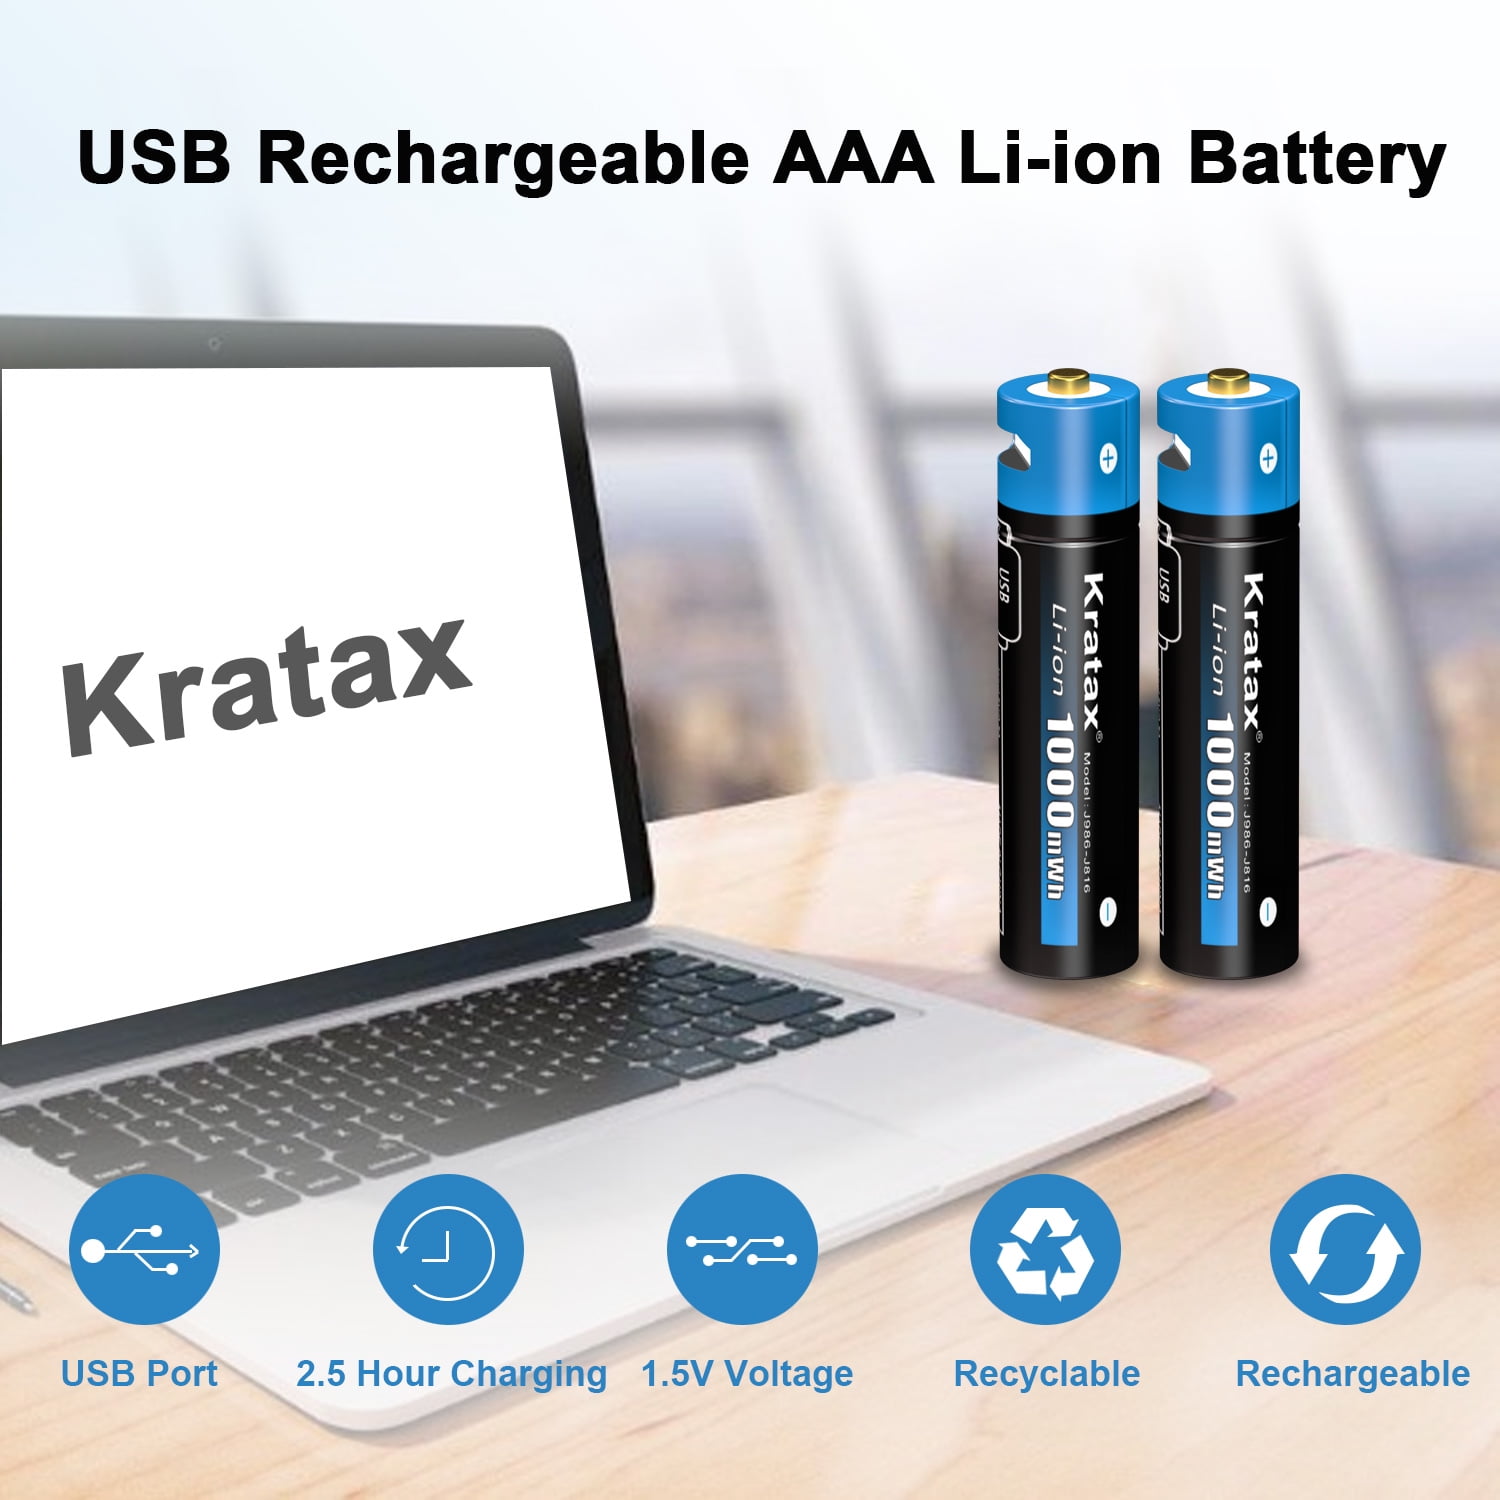 AAA rechargeable batteries with Type C port - GF CHIMEX